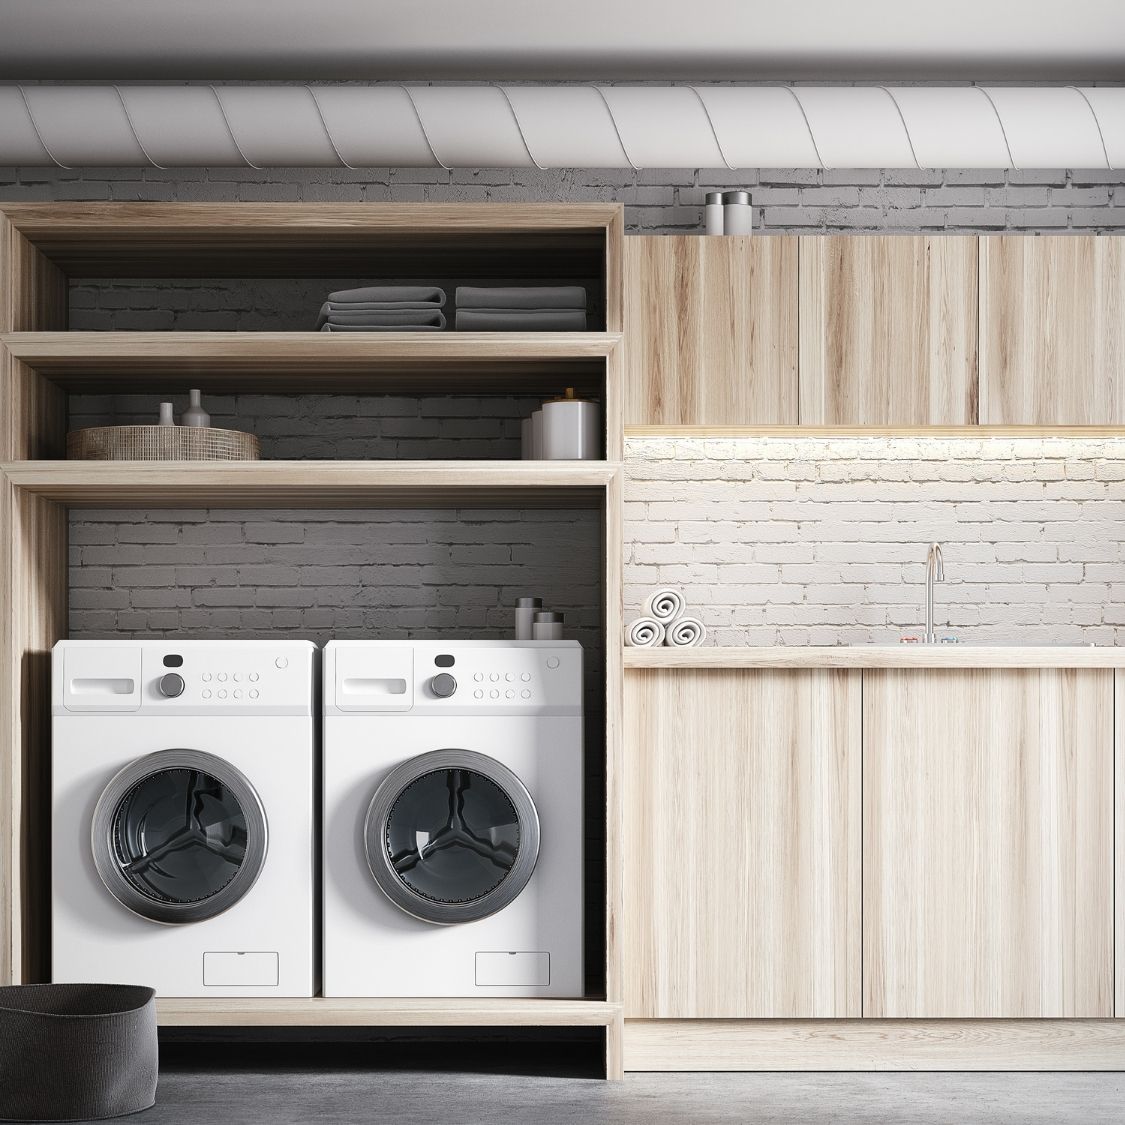 Why Landlords Should Offer a Laundry Room